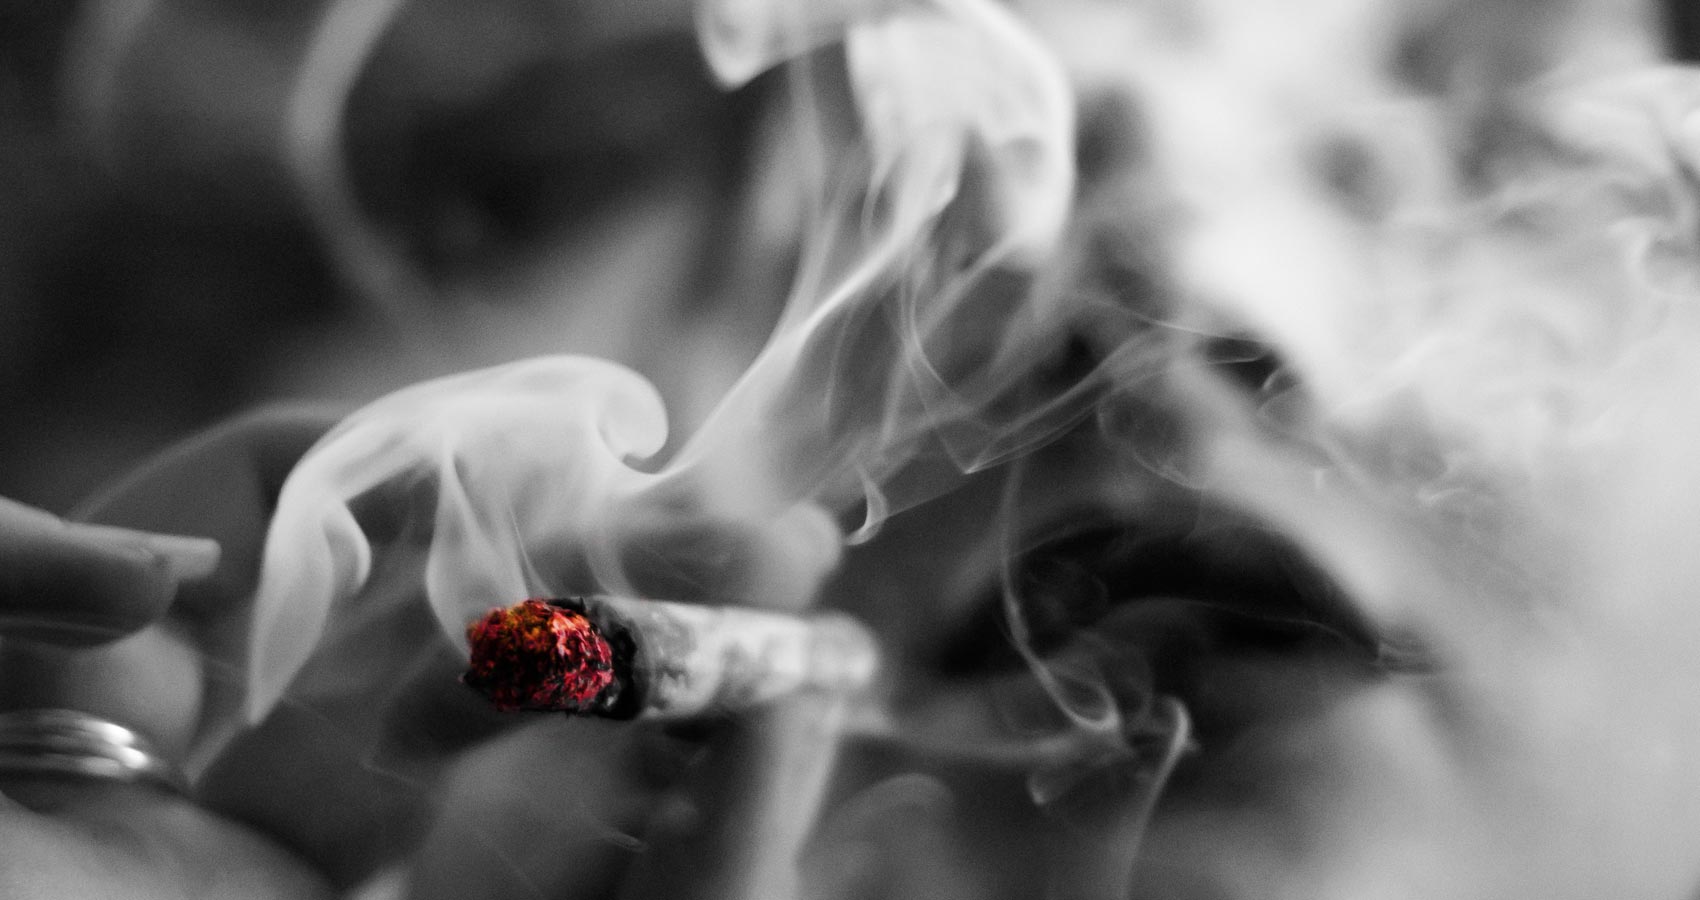 Cigarette Reverie, poetry by Anagha Agnes at Spillwords.com